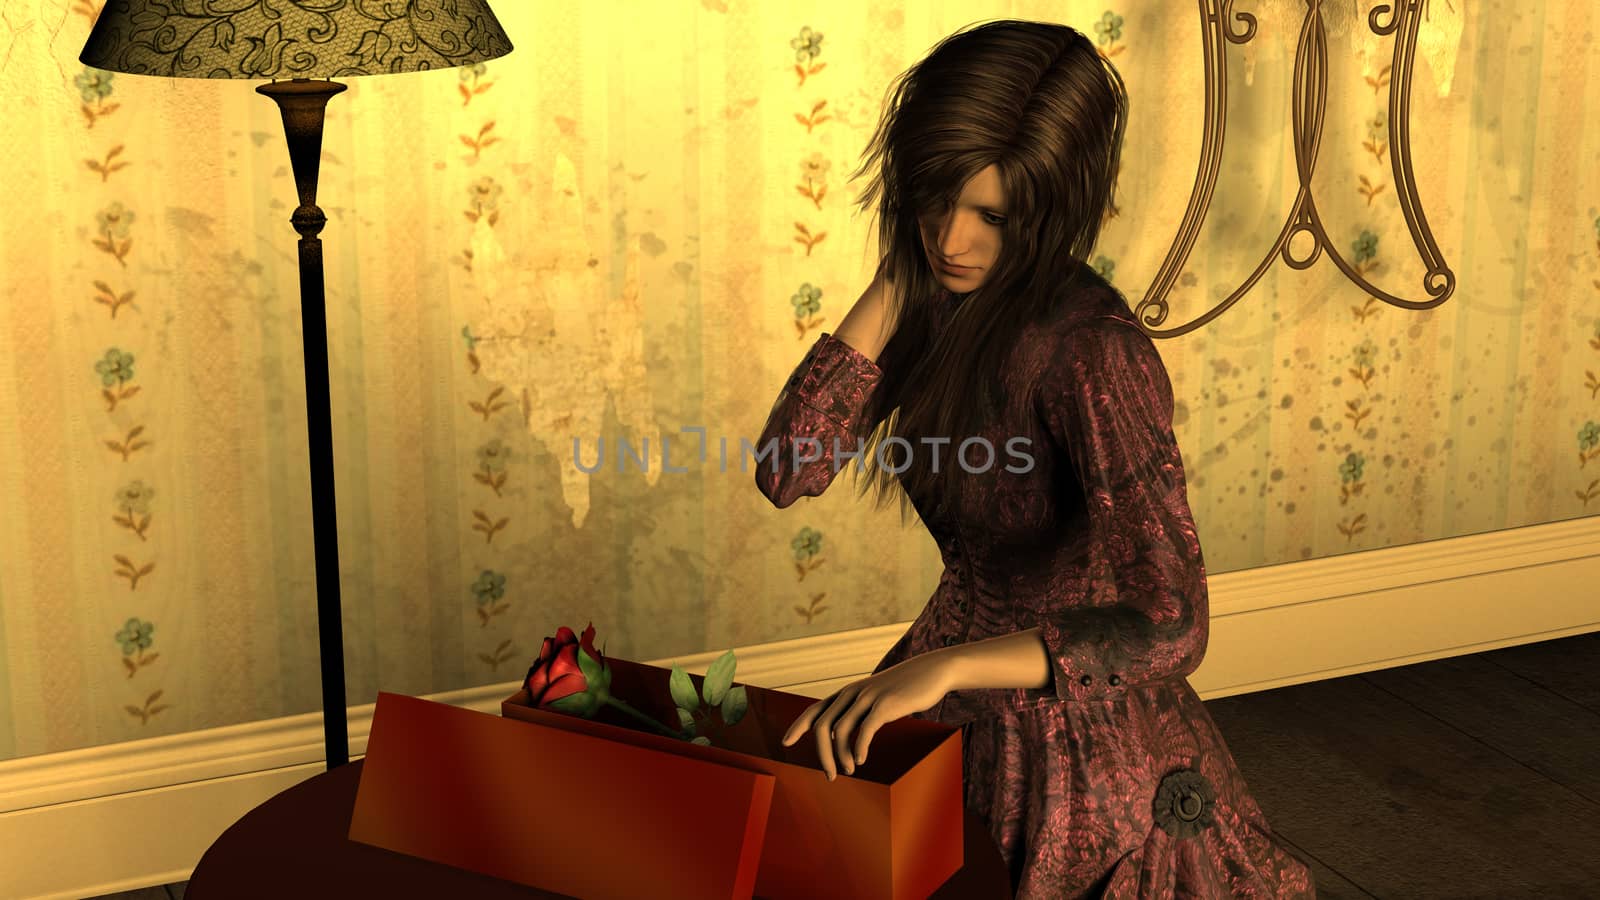 Young Woman with Victorian Dress opening a Gift Box with Red Rose by ankarb